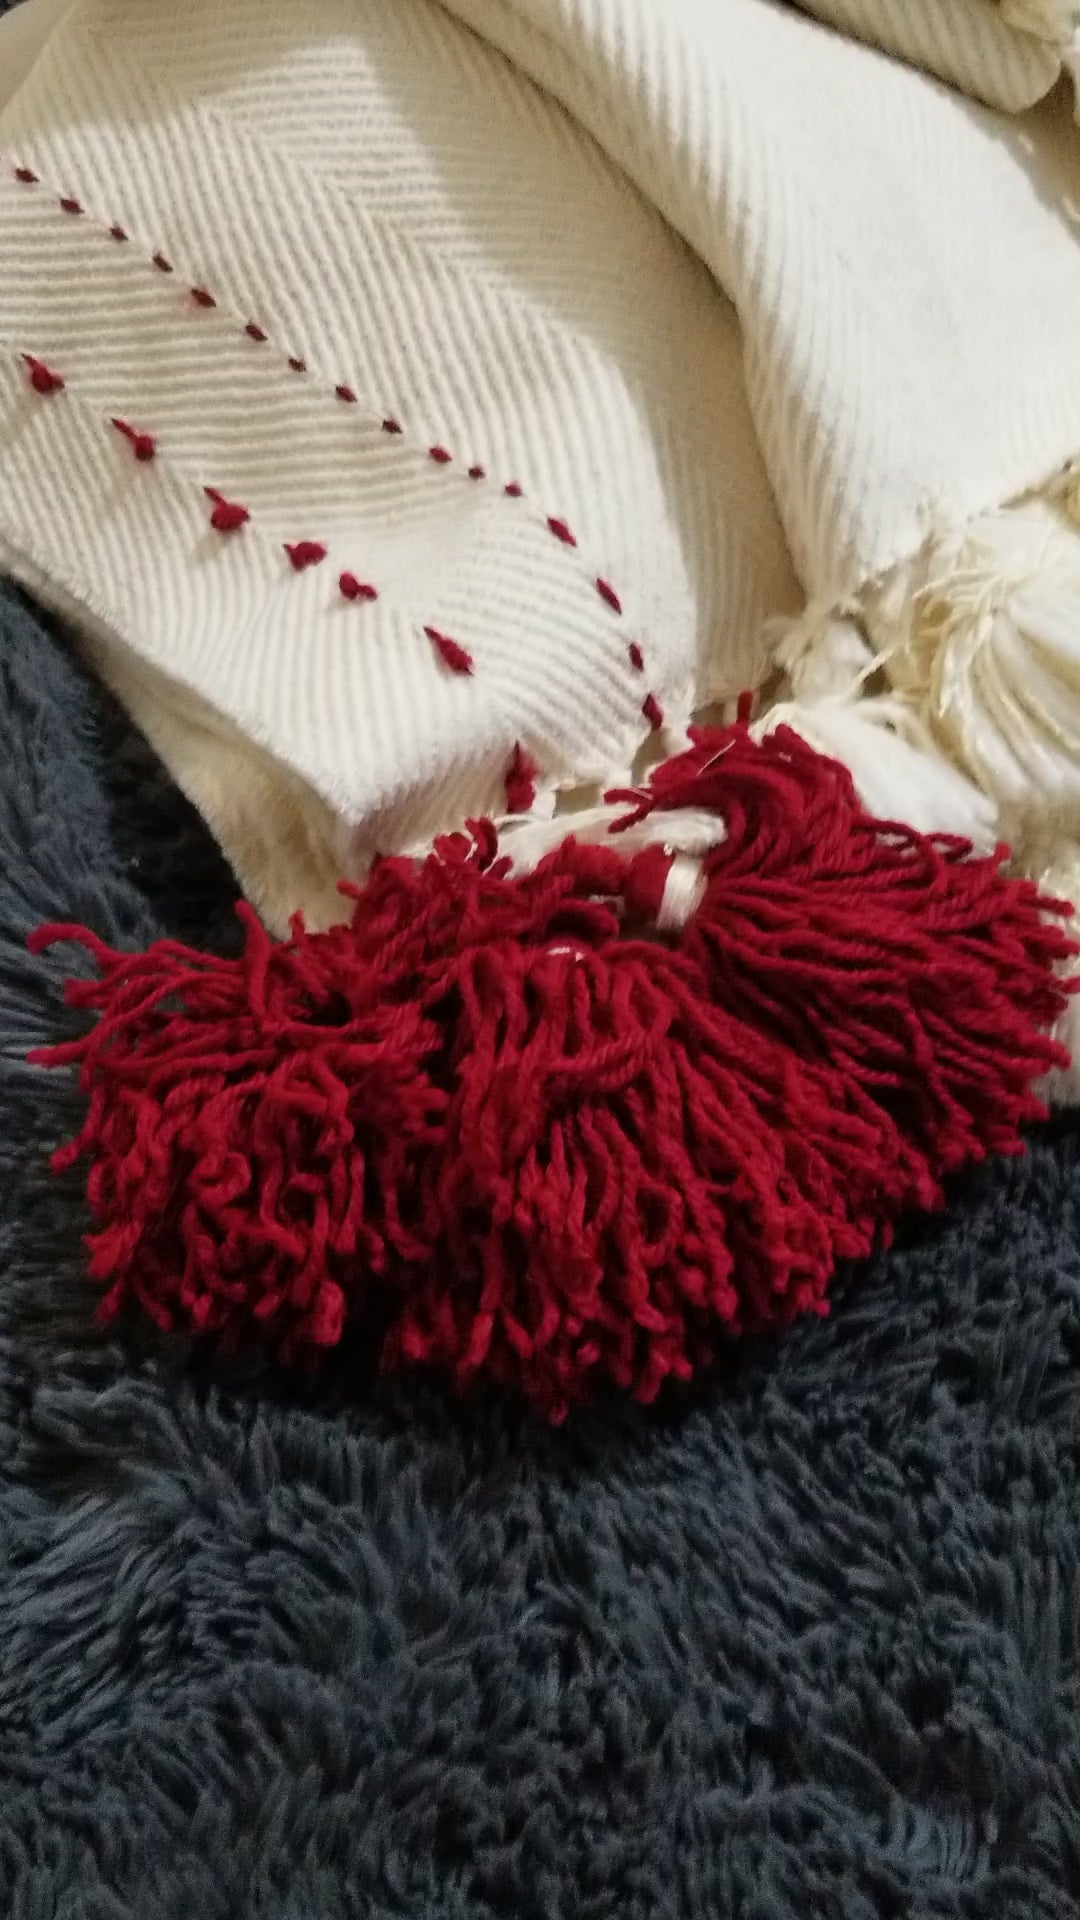 Complete your look with this elegant sofa throw  made from luxurious woven fabric soft to the touch for your comfort.  Red and Beige Luxury designer throw  runner scarf  on sale